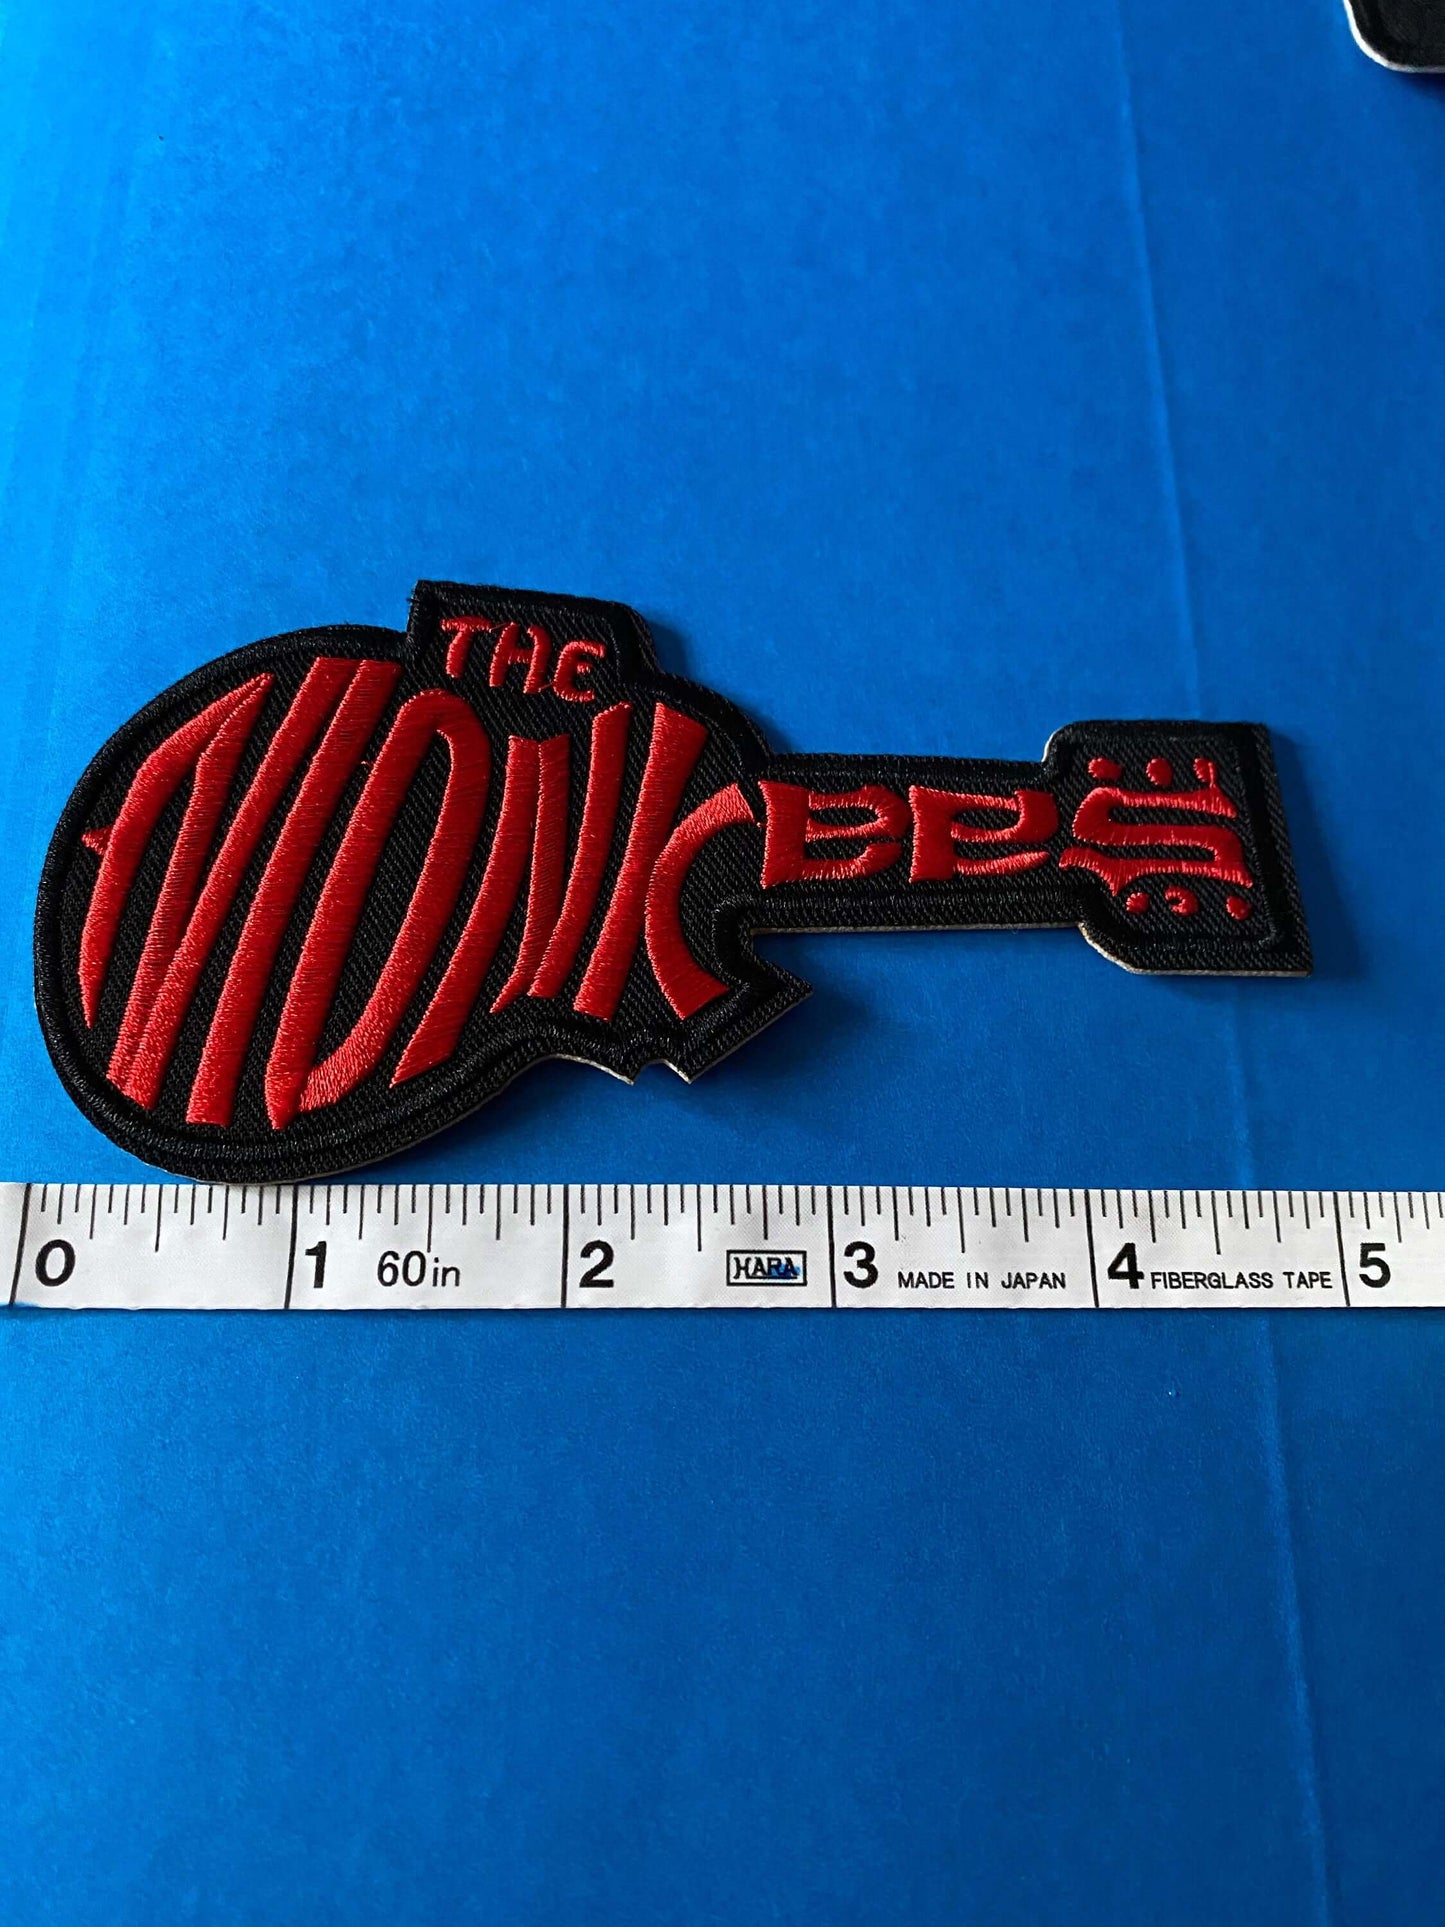 The Monkees logo patch